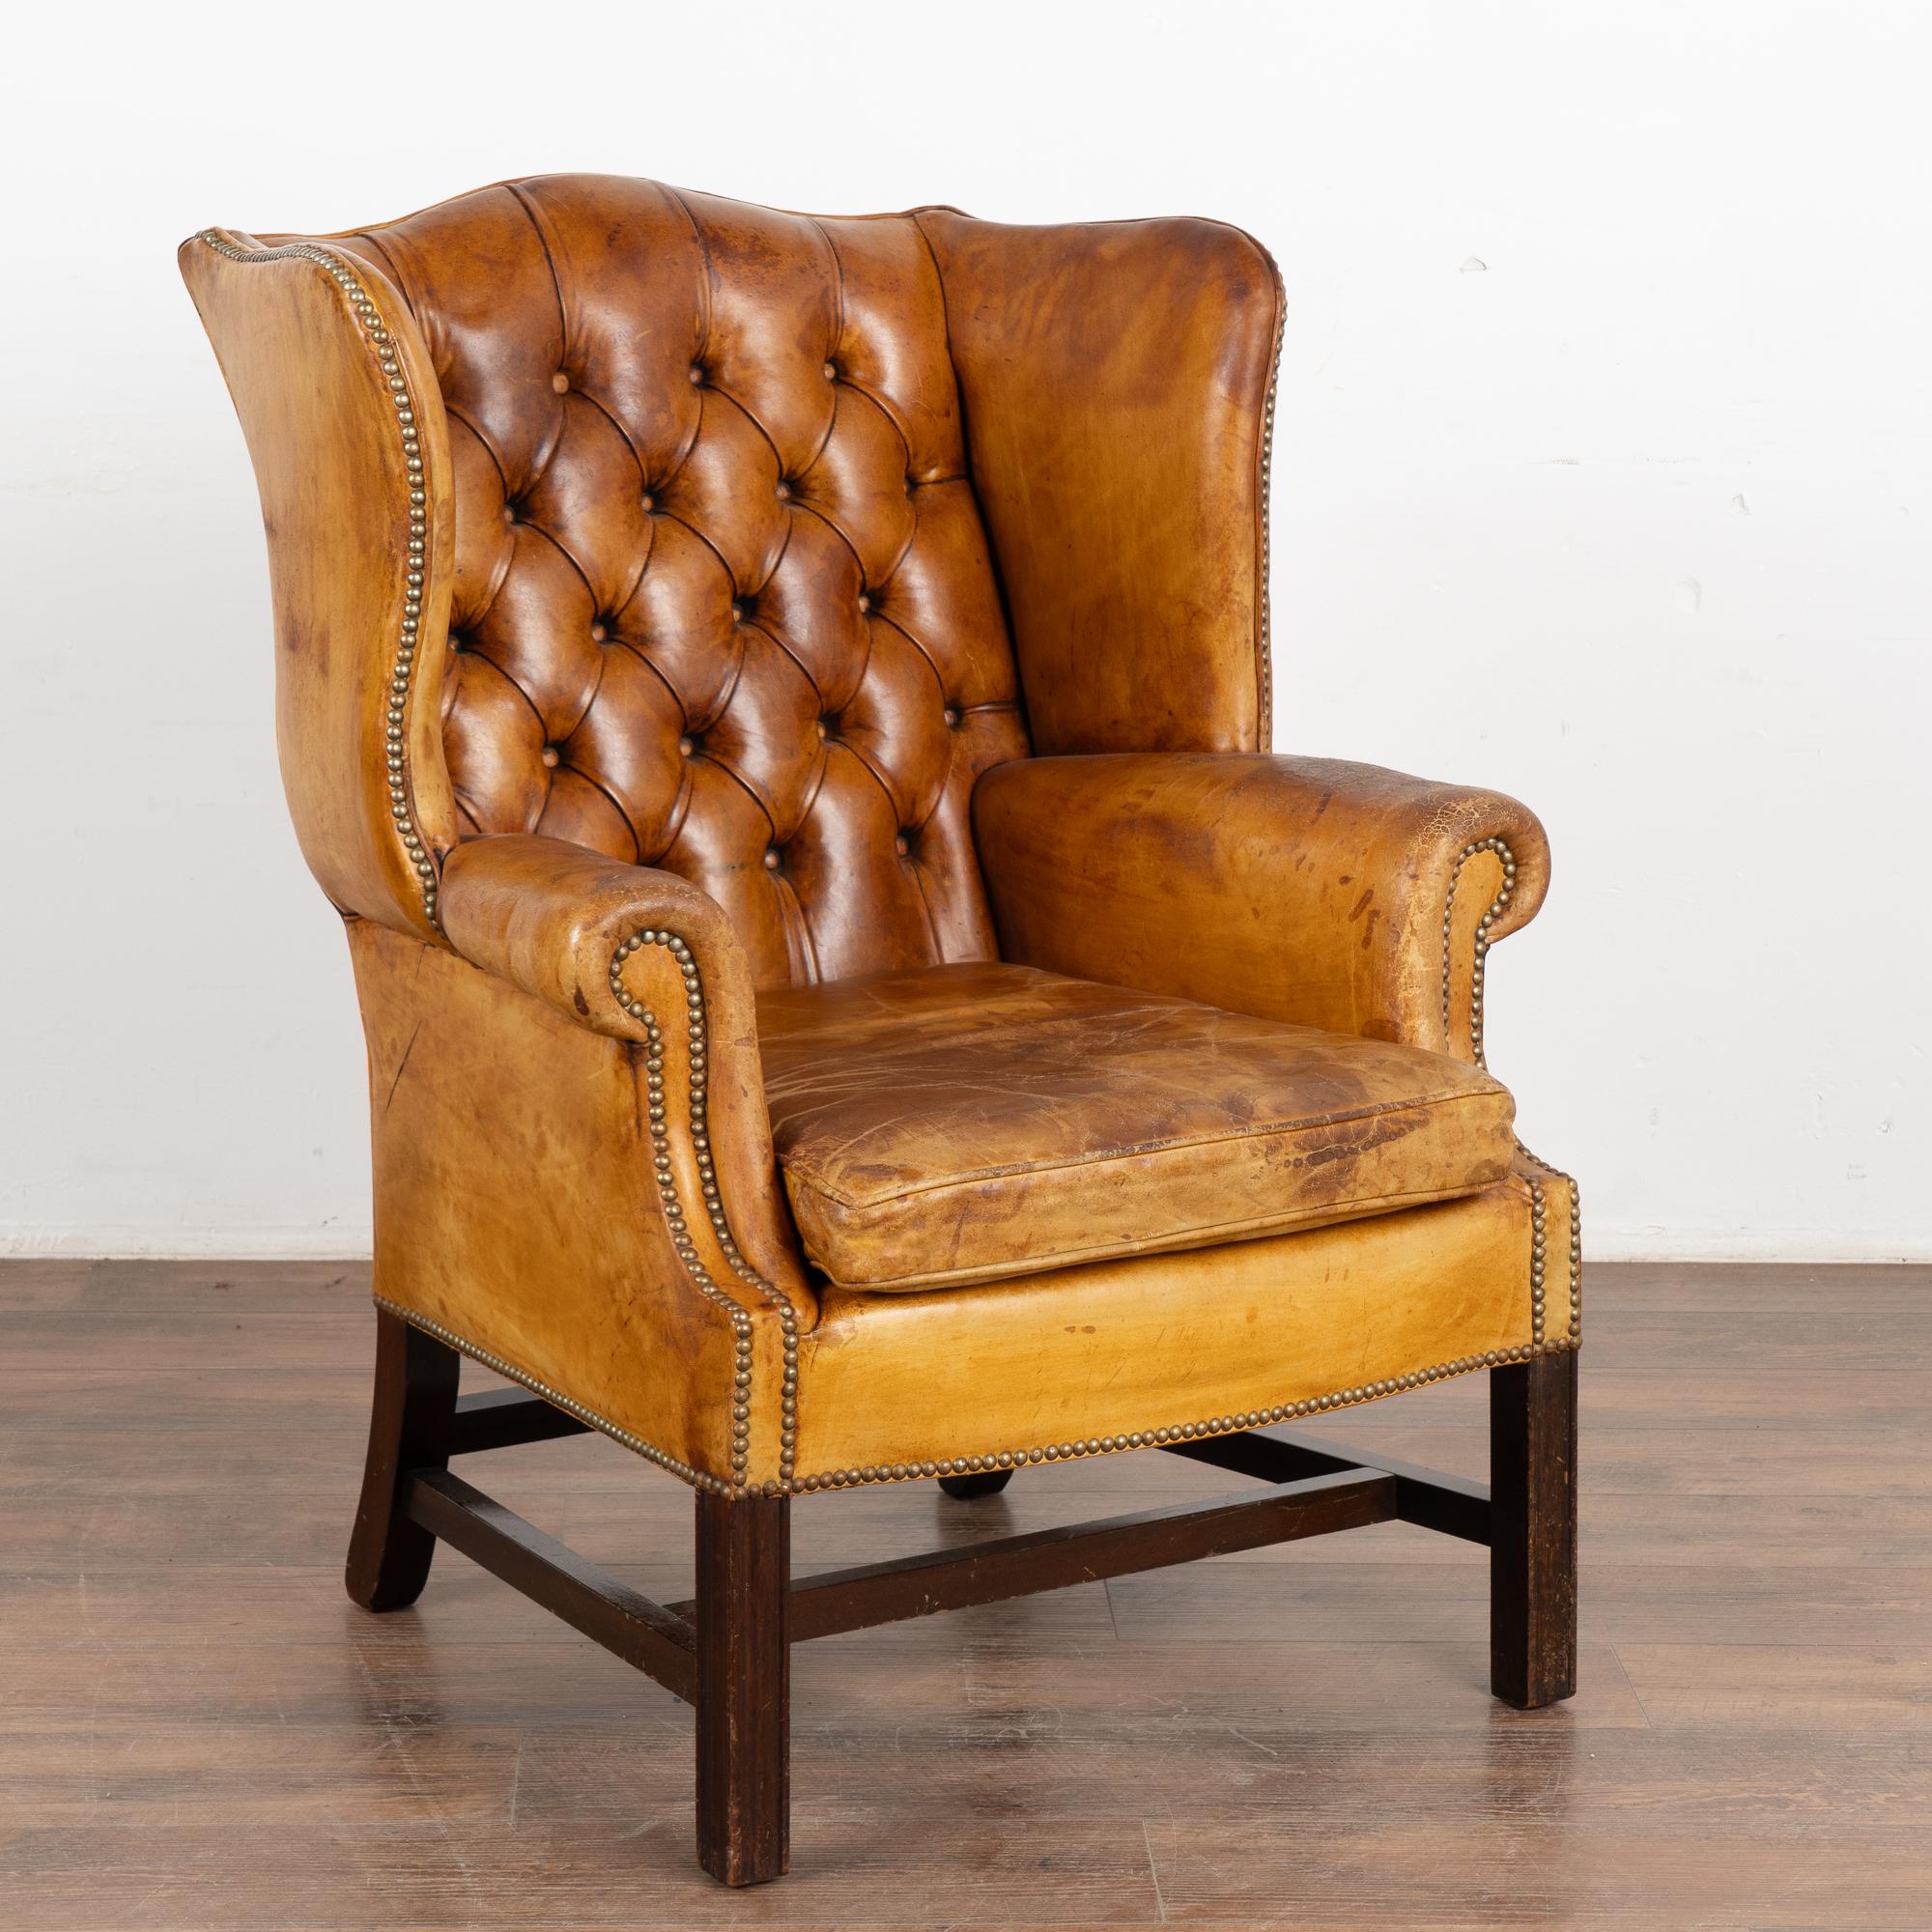 Vintage brown leather Chesterfield wingback club chair with aged patina.
Wings, rolled arms, block feet, buttons and nailhead trim in place. 
Aged leather reflects generations of use, seen in seat discoloration and throughout which creates the worn